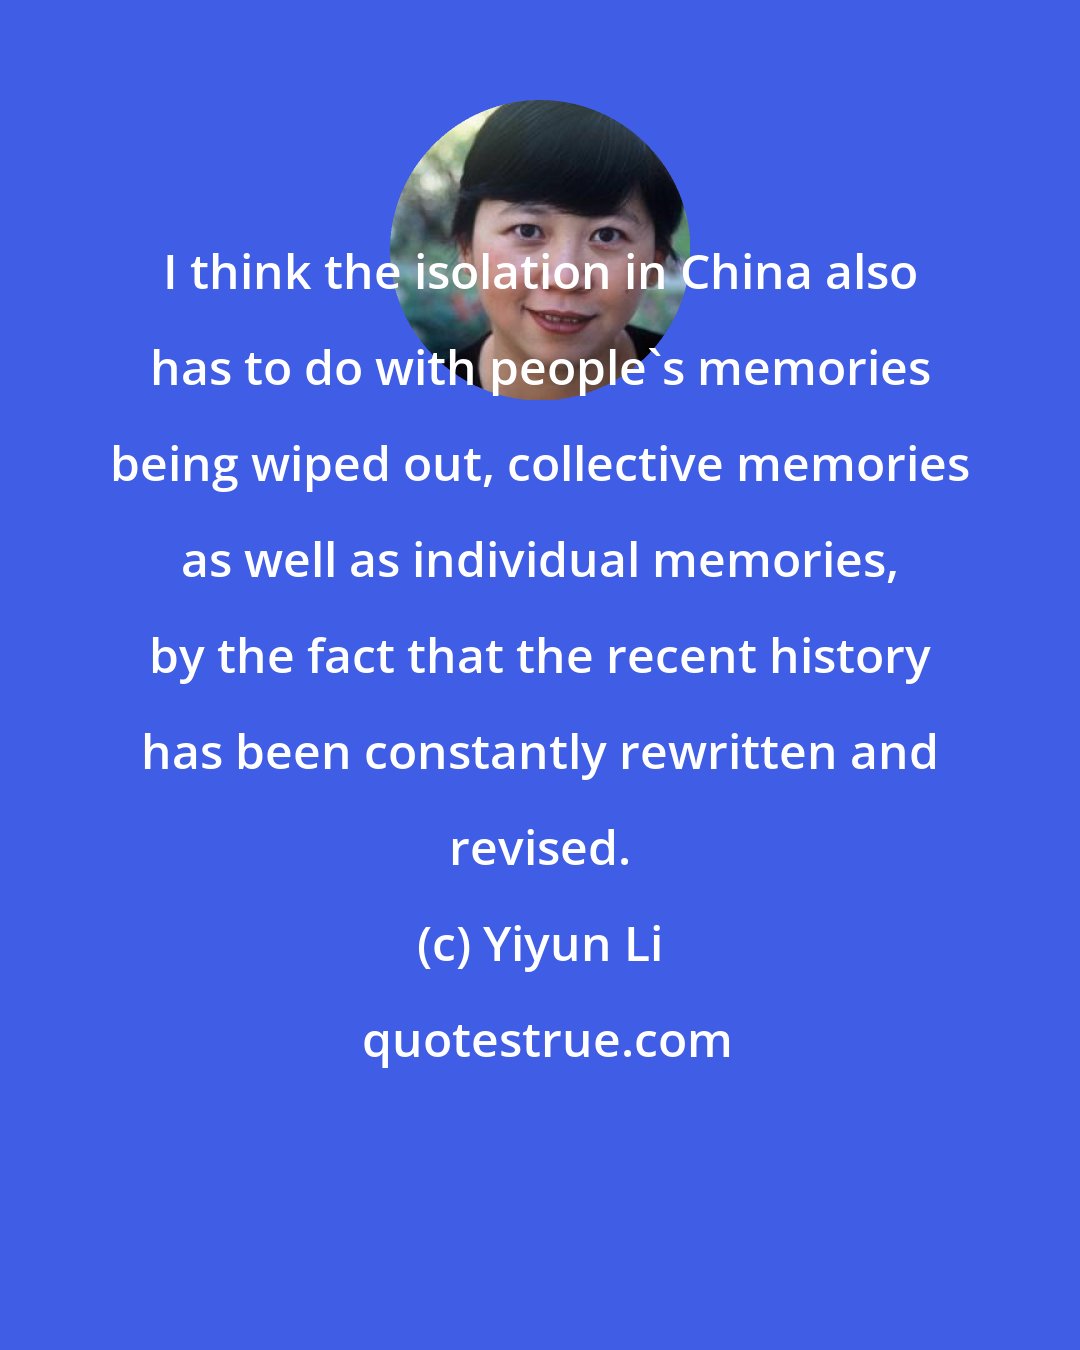 Yiyun Li: I think the isolation in China also has to do with people's memories being wiped out, collective memories as well as individual memories, by the fact that the recent history has been constantly rewritten and revised.